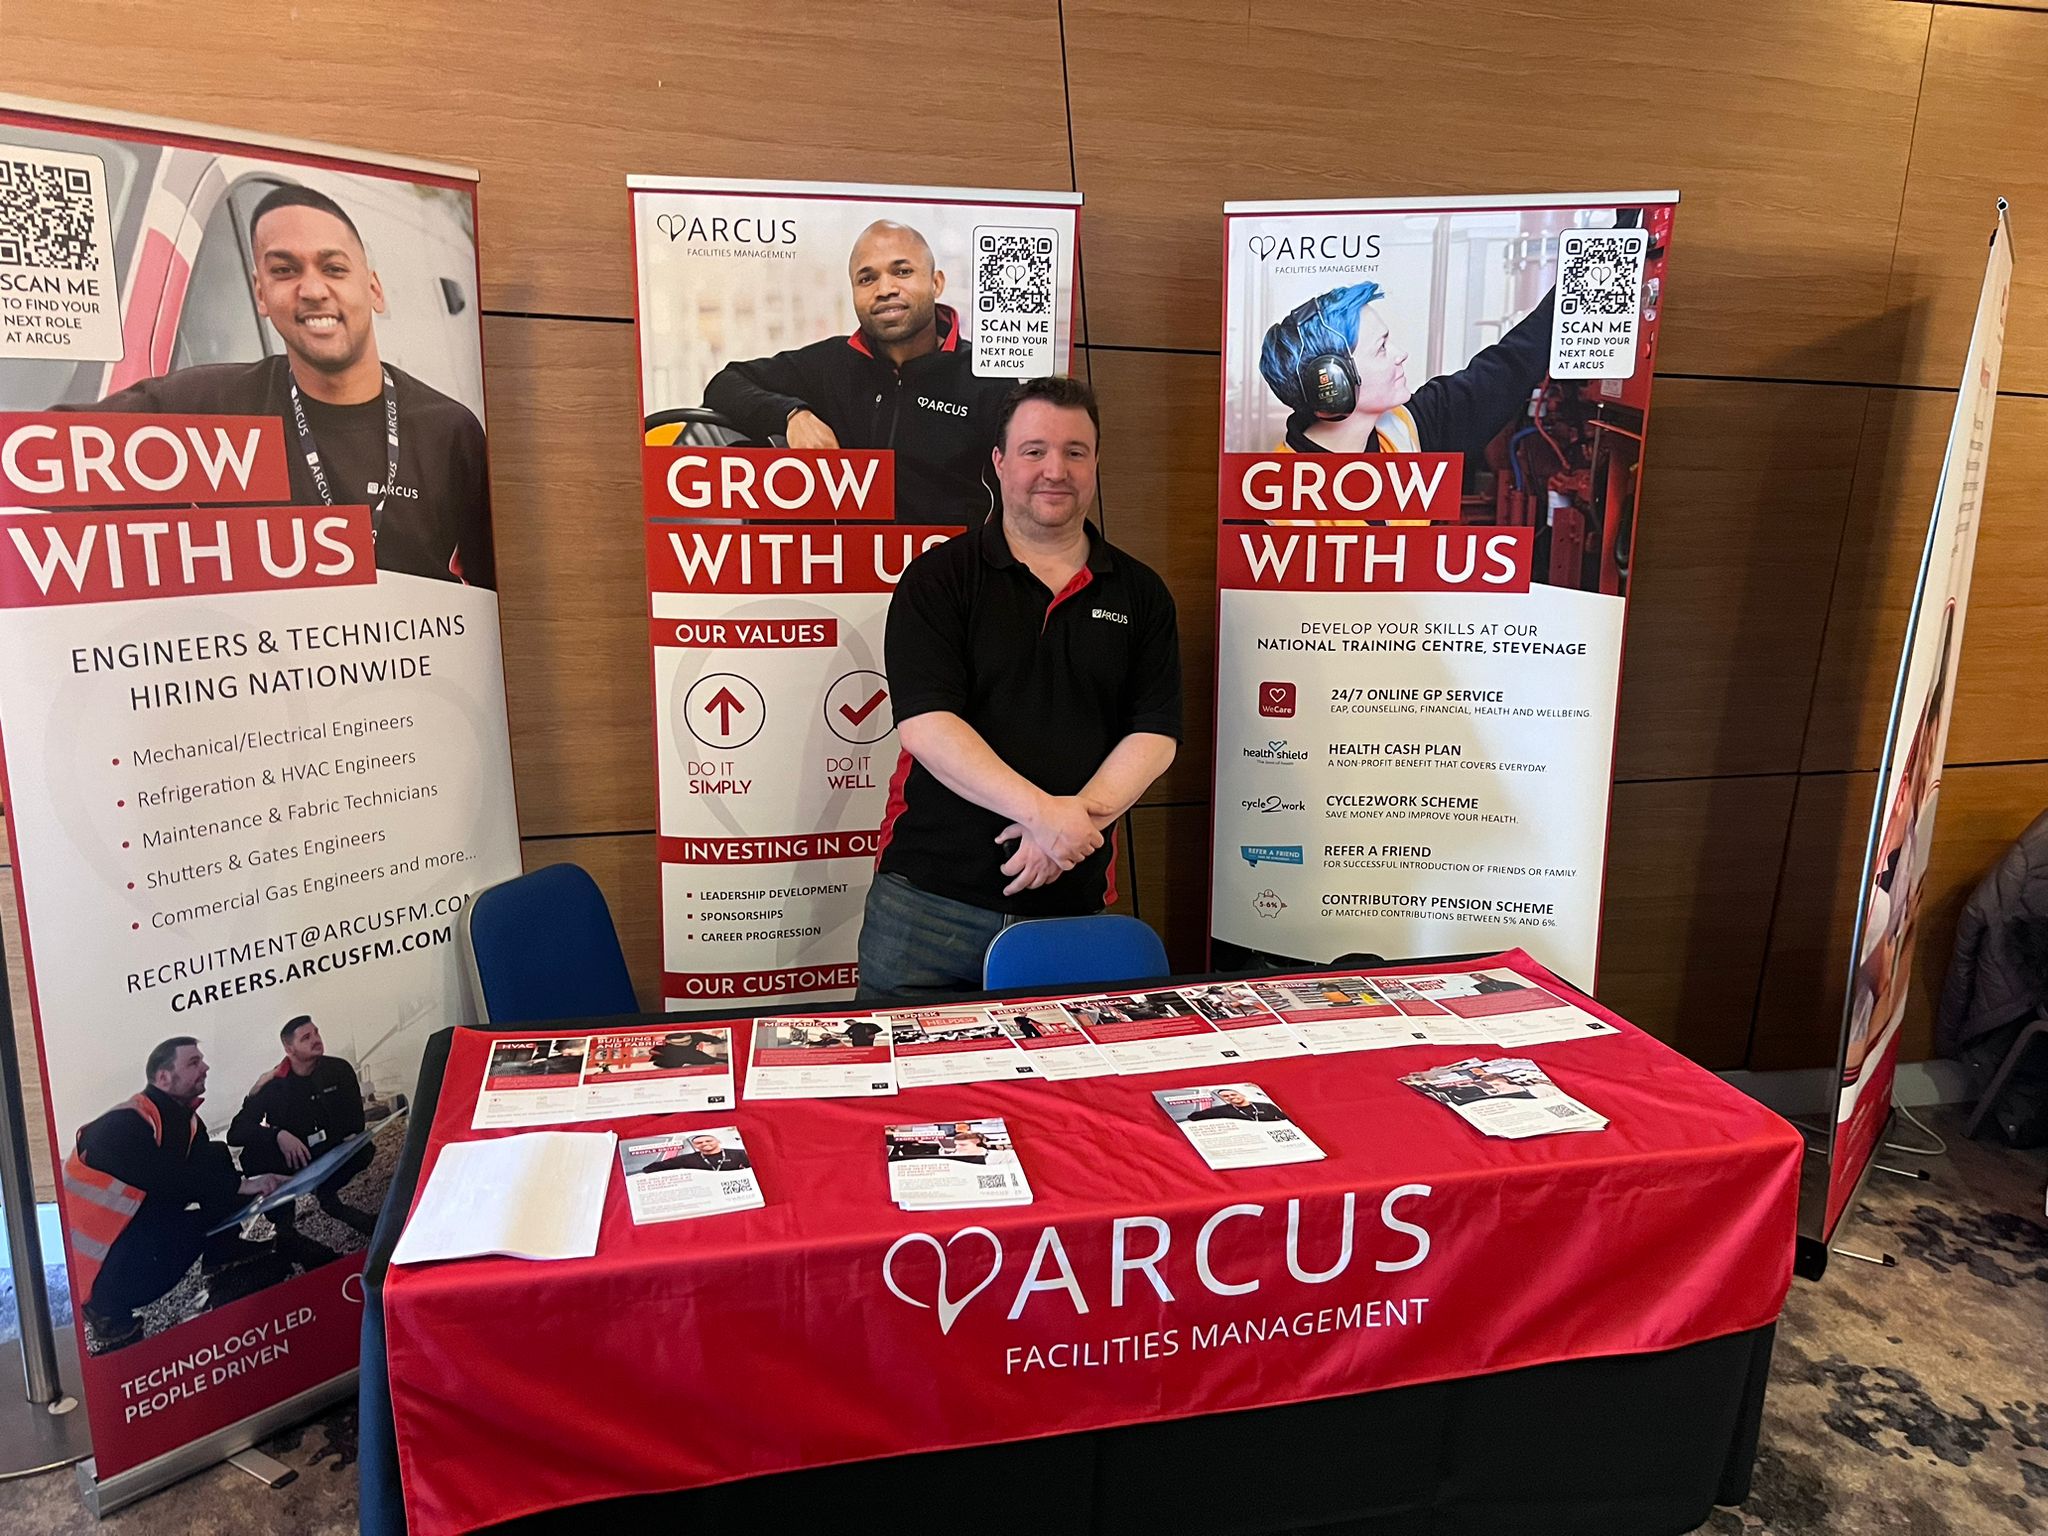 Arcus FM at our event in Southend-on-Sea